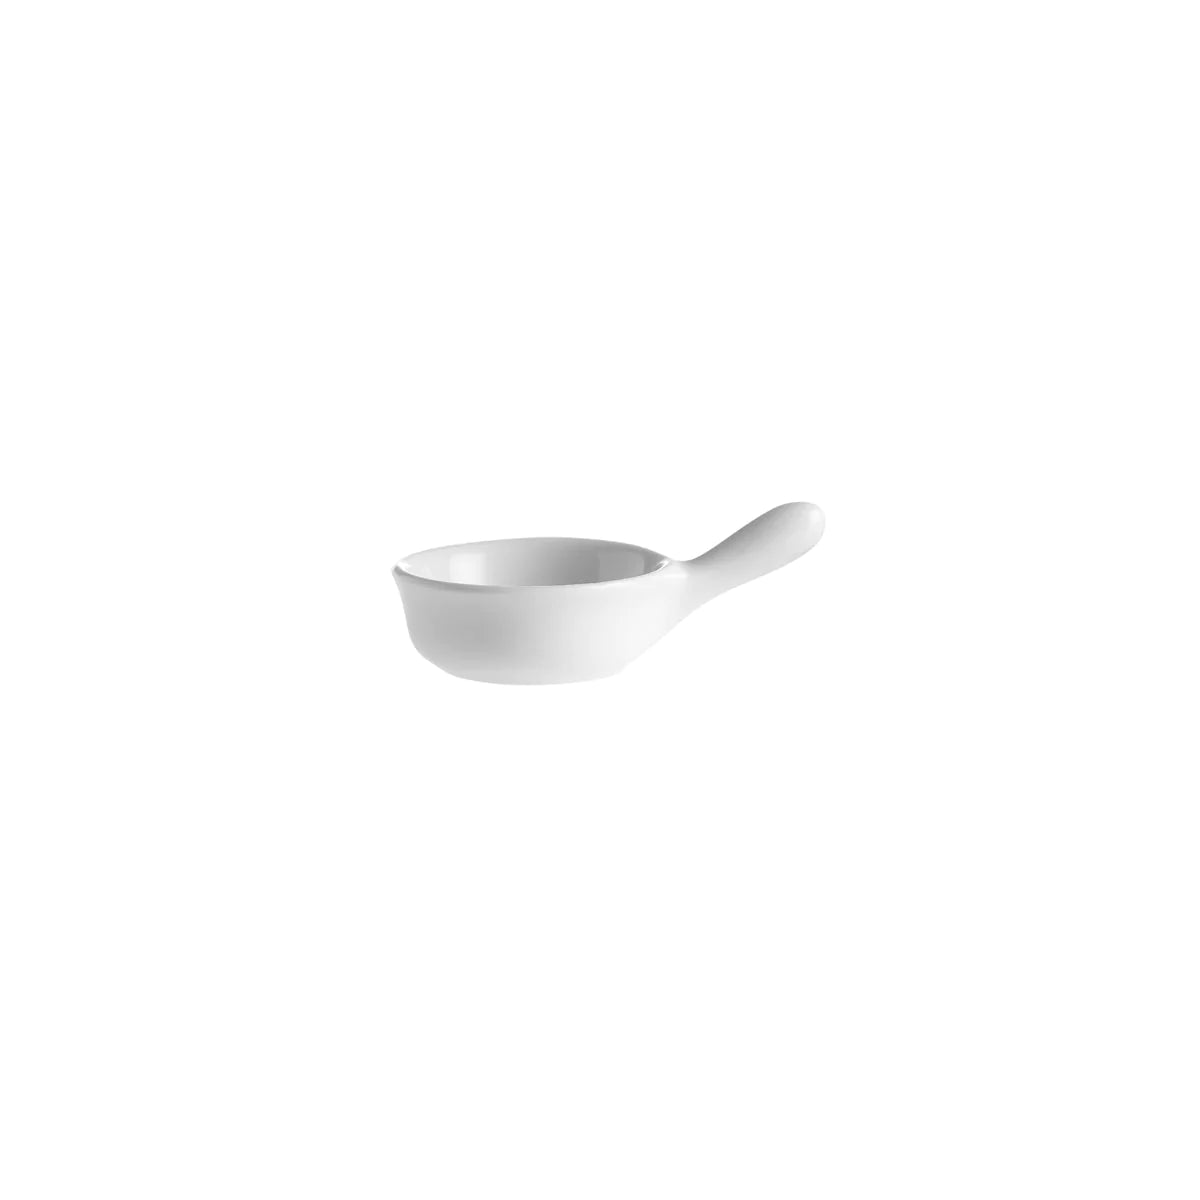 MINIATURE BUFFET SNACK BOWL WITH HANDLE